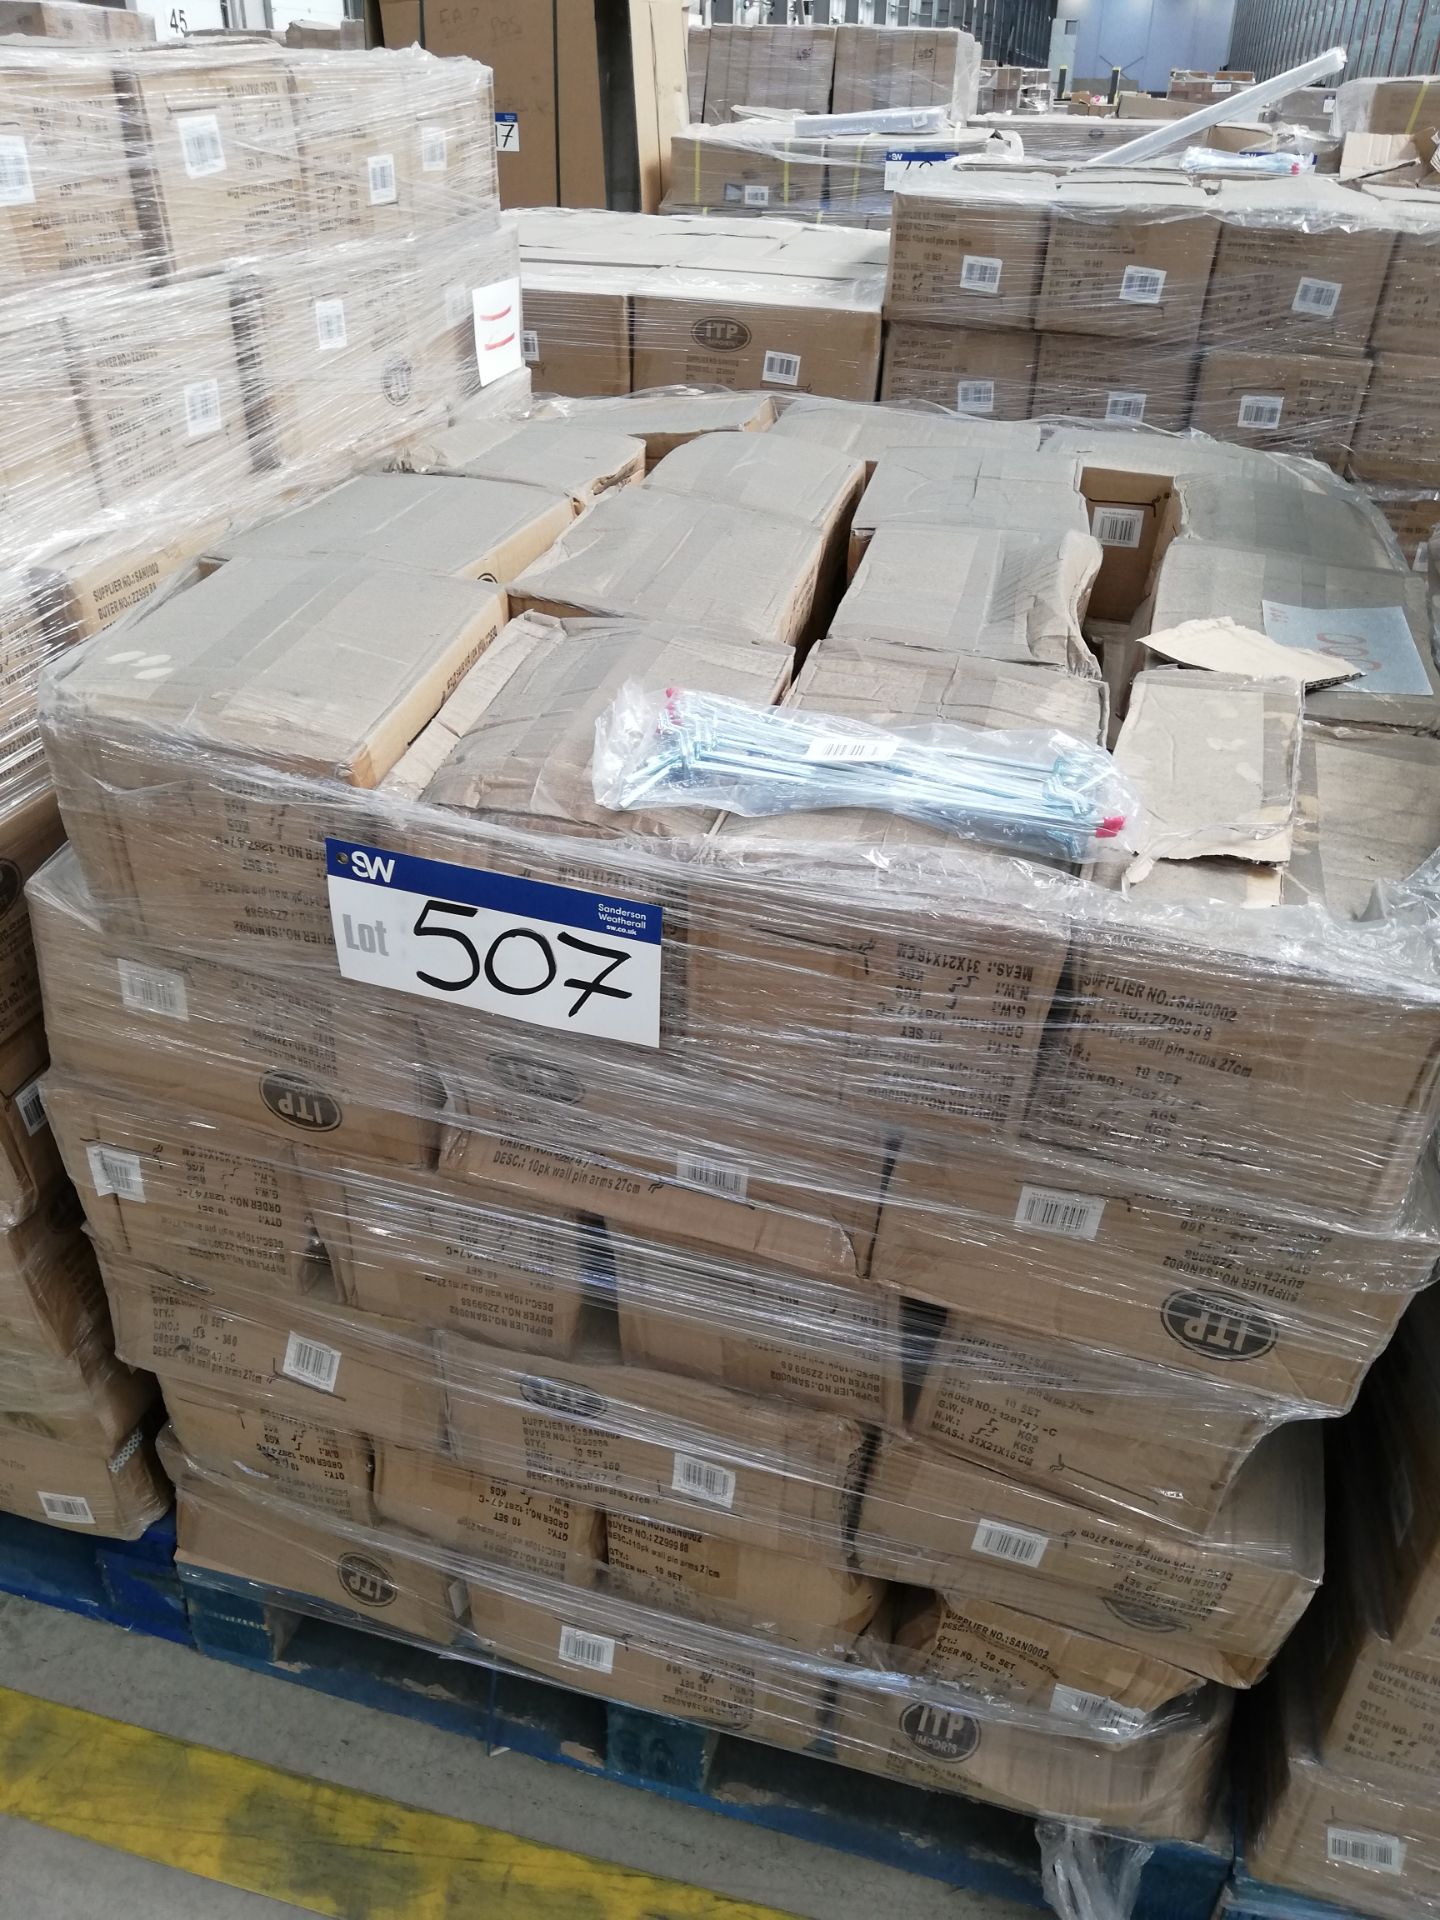 886 x Boxes of 27cm Wall Pin Arms on 10 pallets